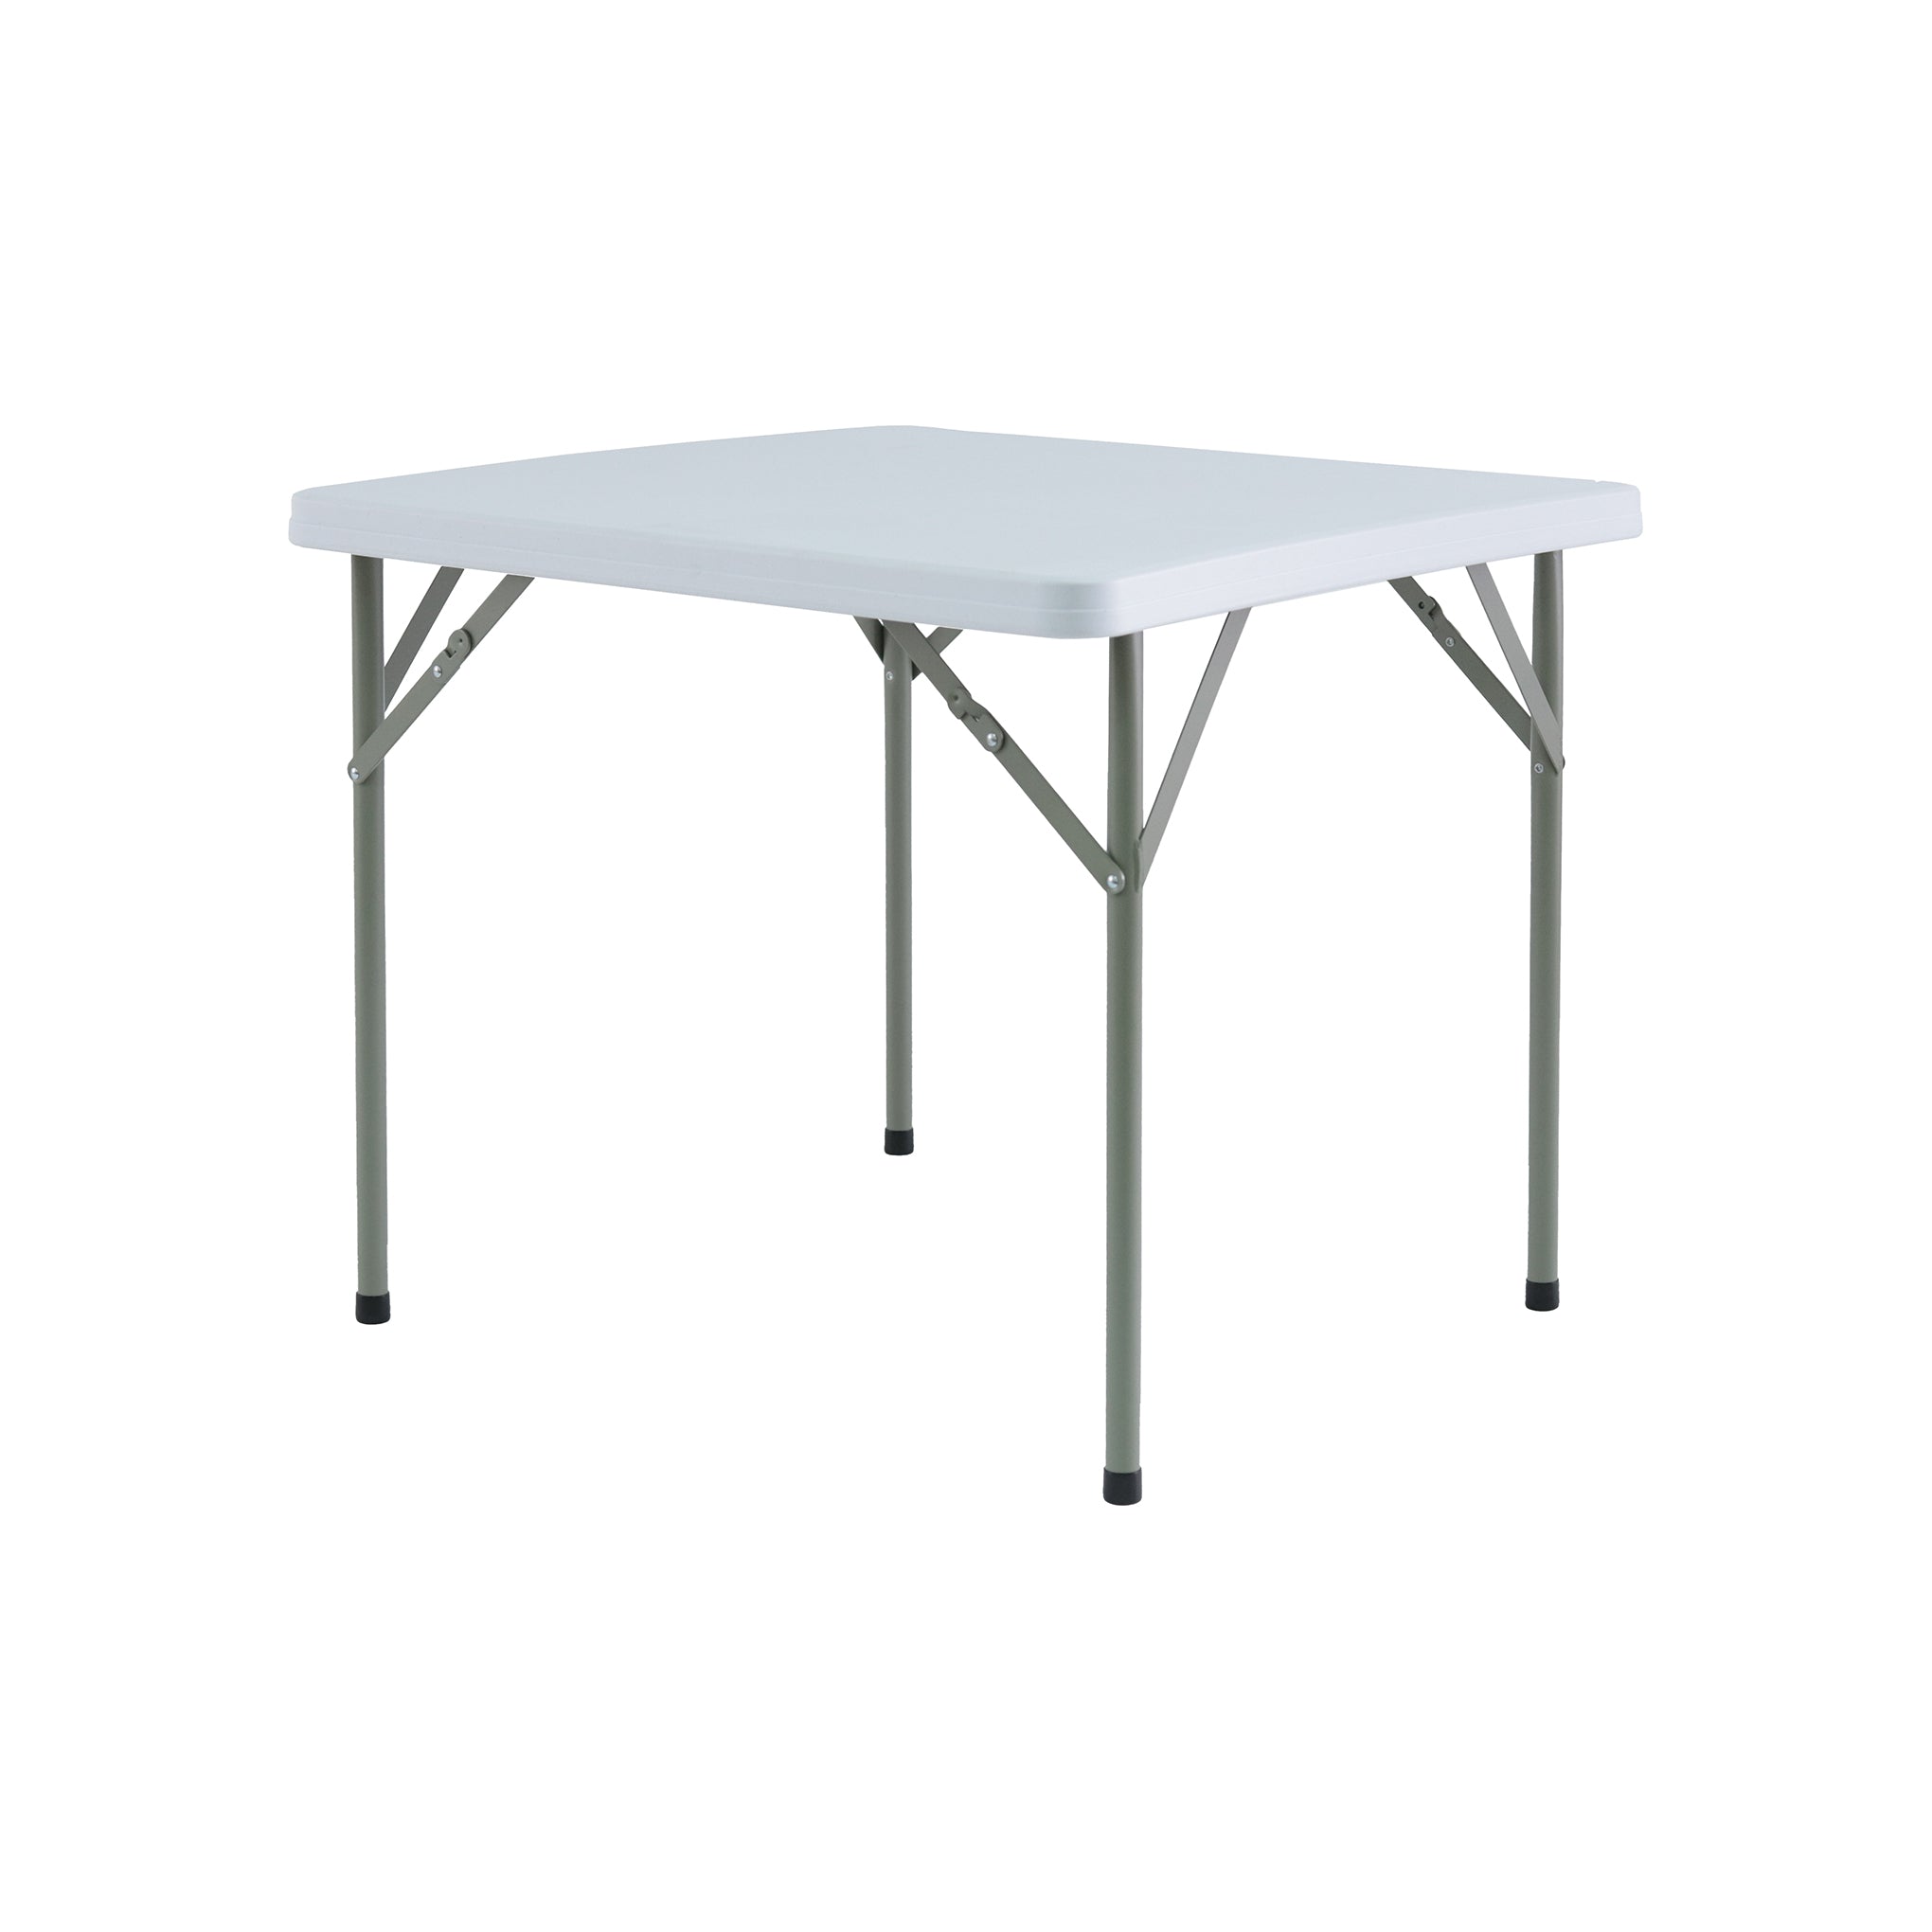 <b>Erie 3FT Square HDPE Folding In Half Banquet Table With Metal Leg</b><br>L860 X W860 X H740